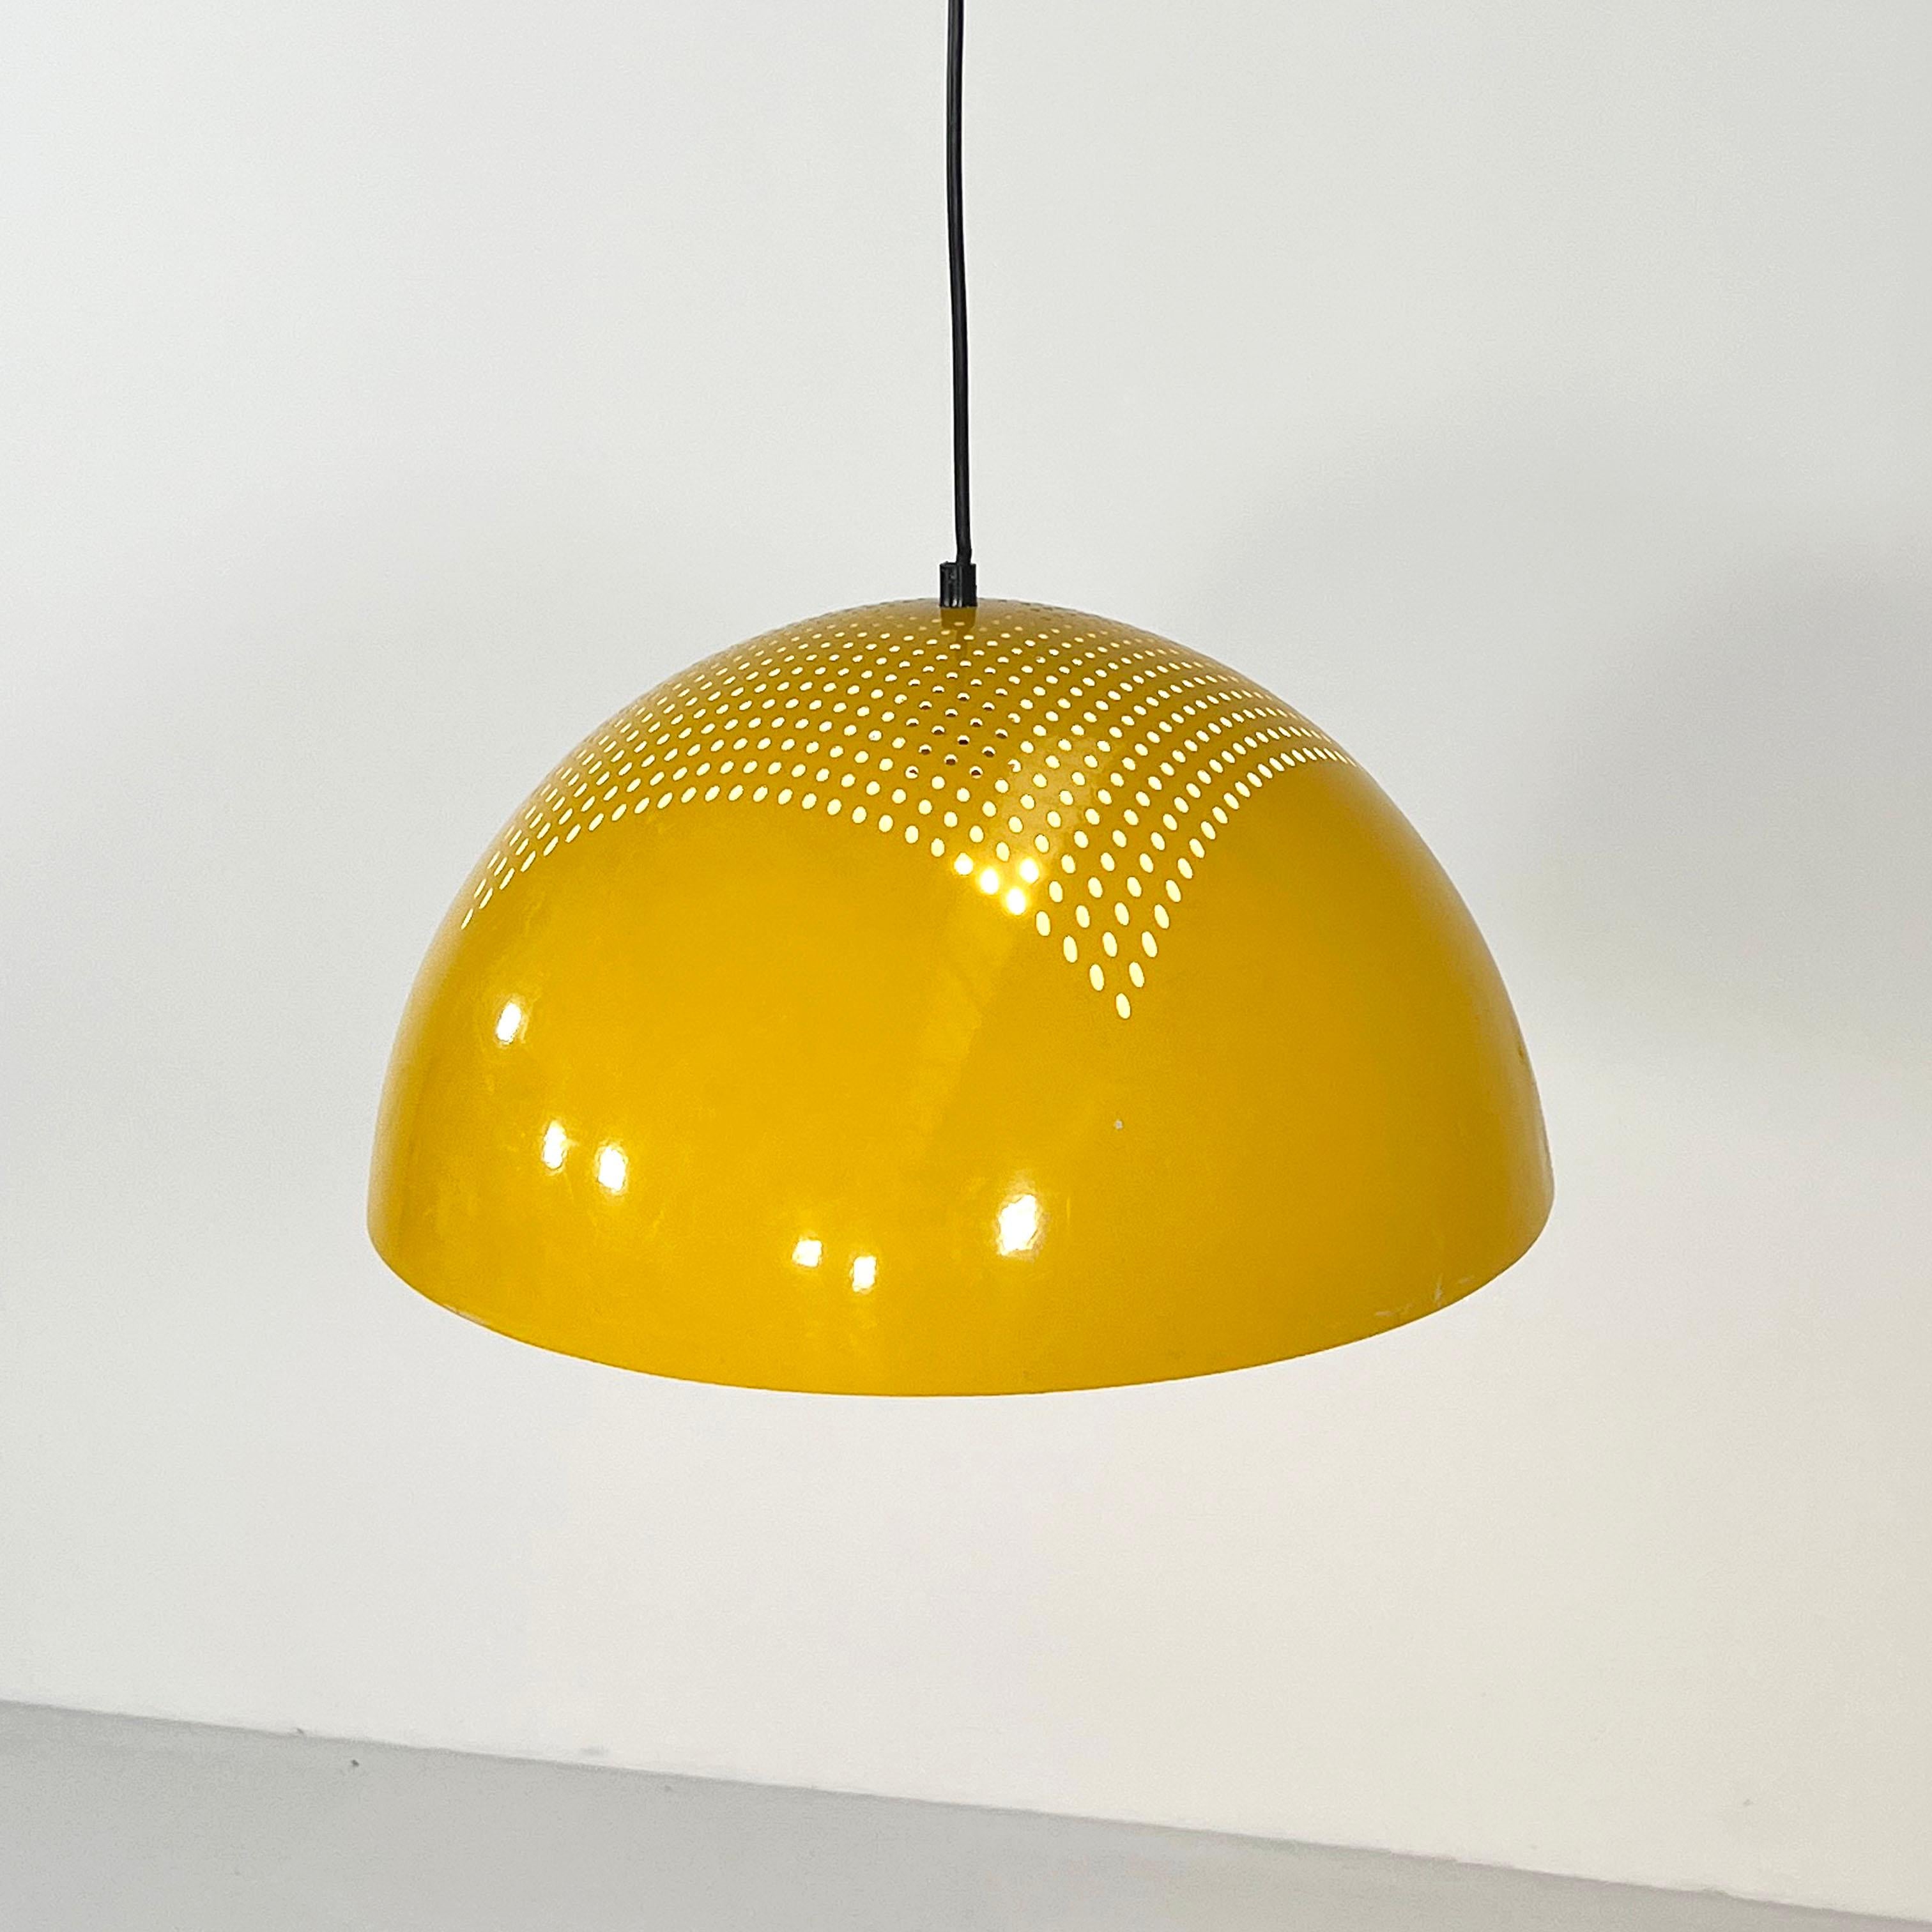 Design Period - Seventies
Measurements - Width 45 cm x Depth 45 cm x Height 26 cm (Wire length 50cm)
Materials - Metal 
Color - Yellow
Light wear consistent with age and use. Some scuffs, dents.